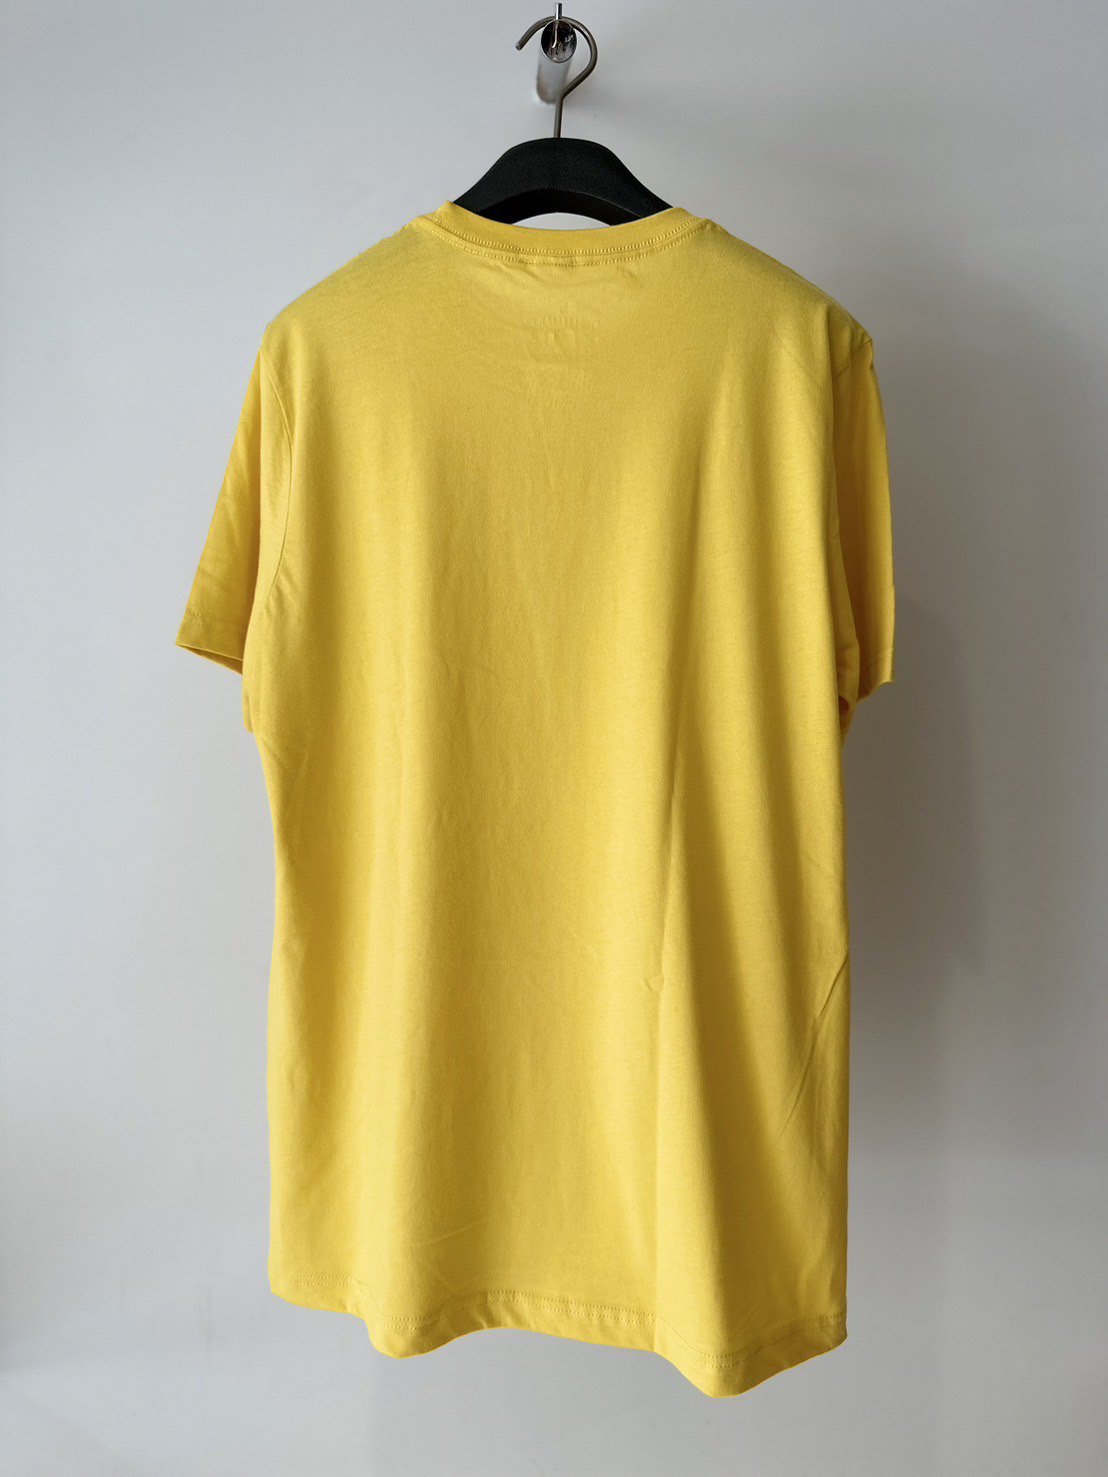 BLUESCENTRIC<br />JAMES BROWN LOGO VINTAGE TEE / YELLOW<img class='new_mark_img2' src='https://img.shop-pro.jp/img/new/icons47.gif' style='border:none;display:inline;margin:0px;padding:0px;width:auto;' />